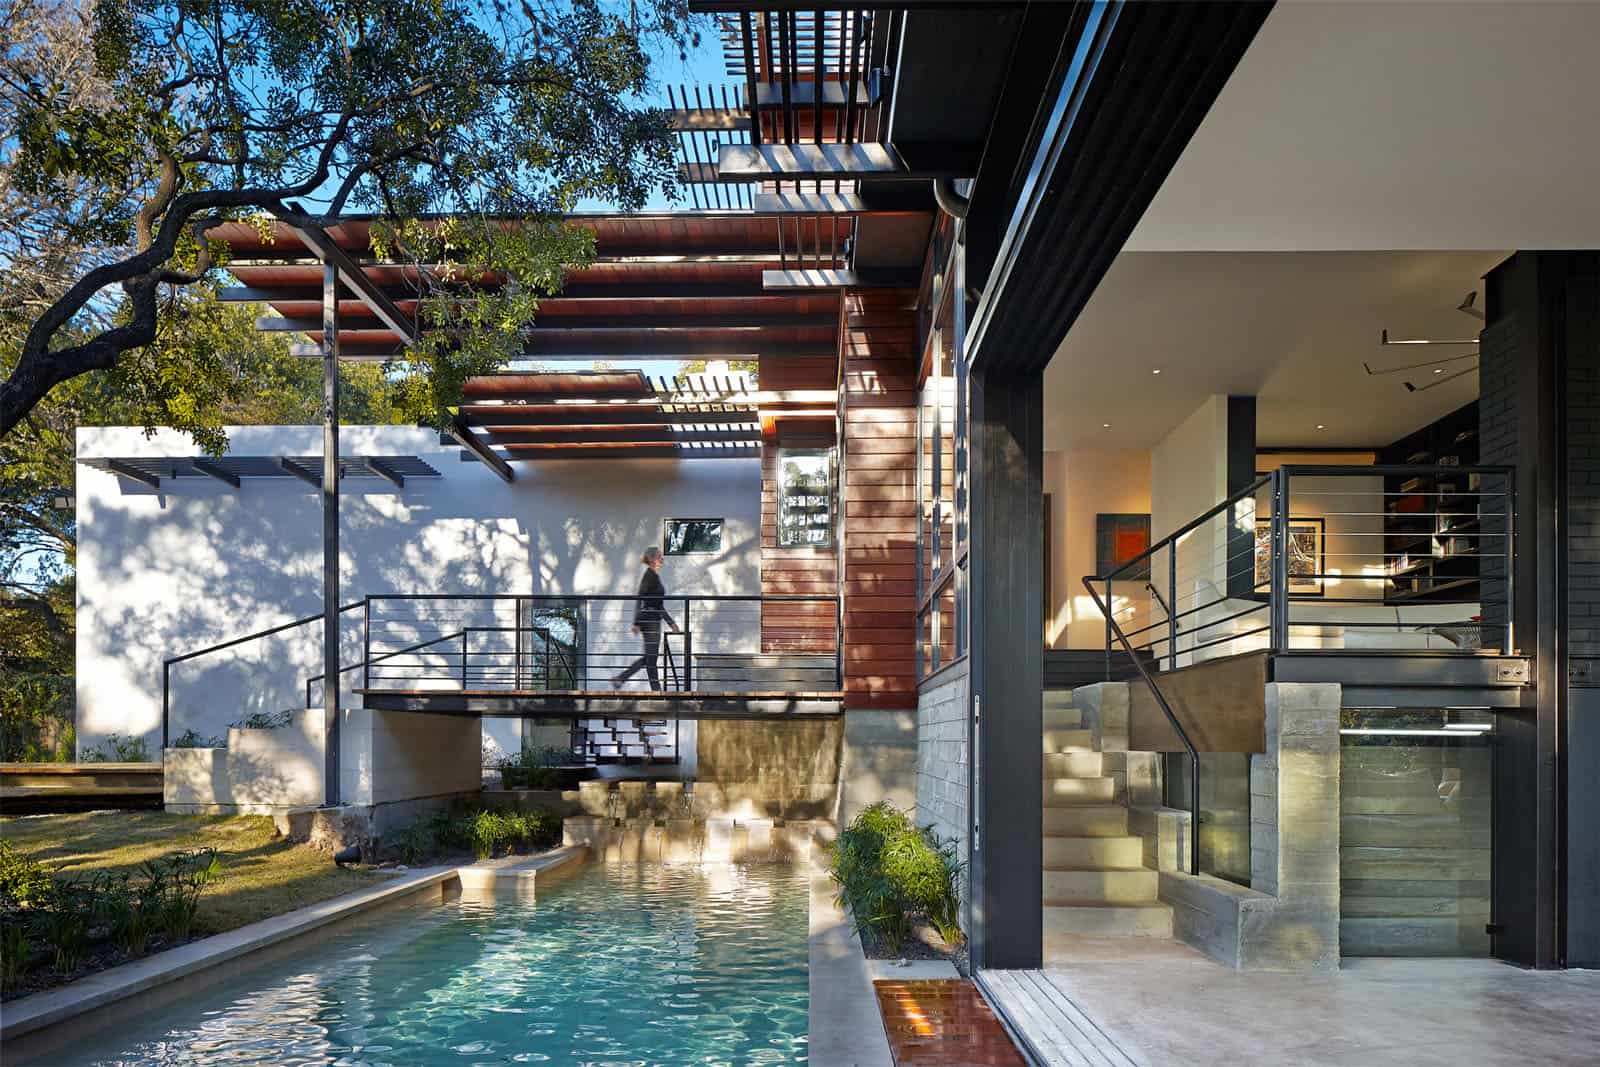 Rancher Morphed into Sustainable 2-Storey House with Bridged Pool